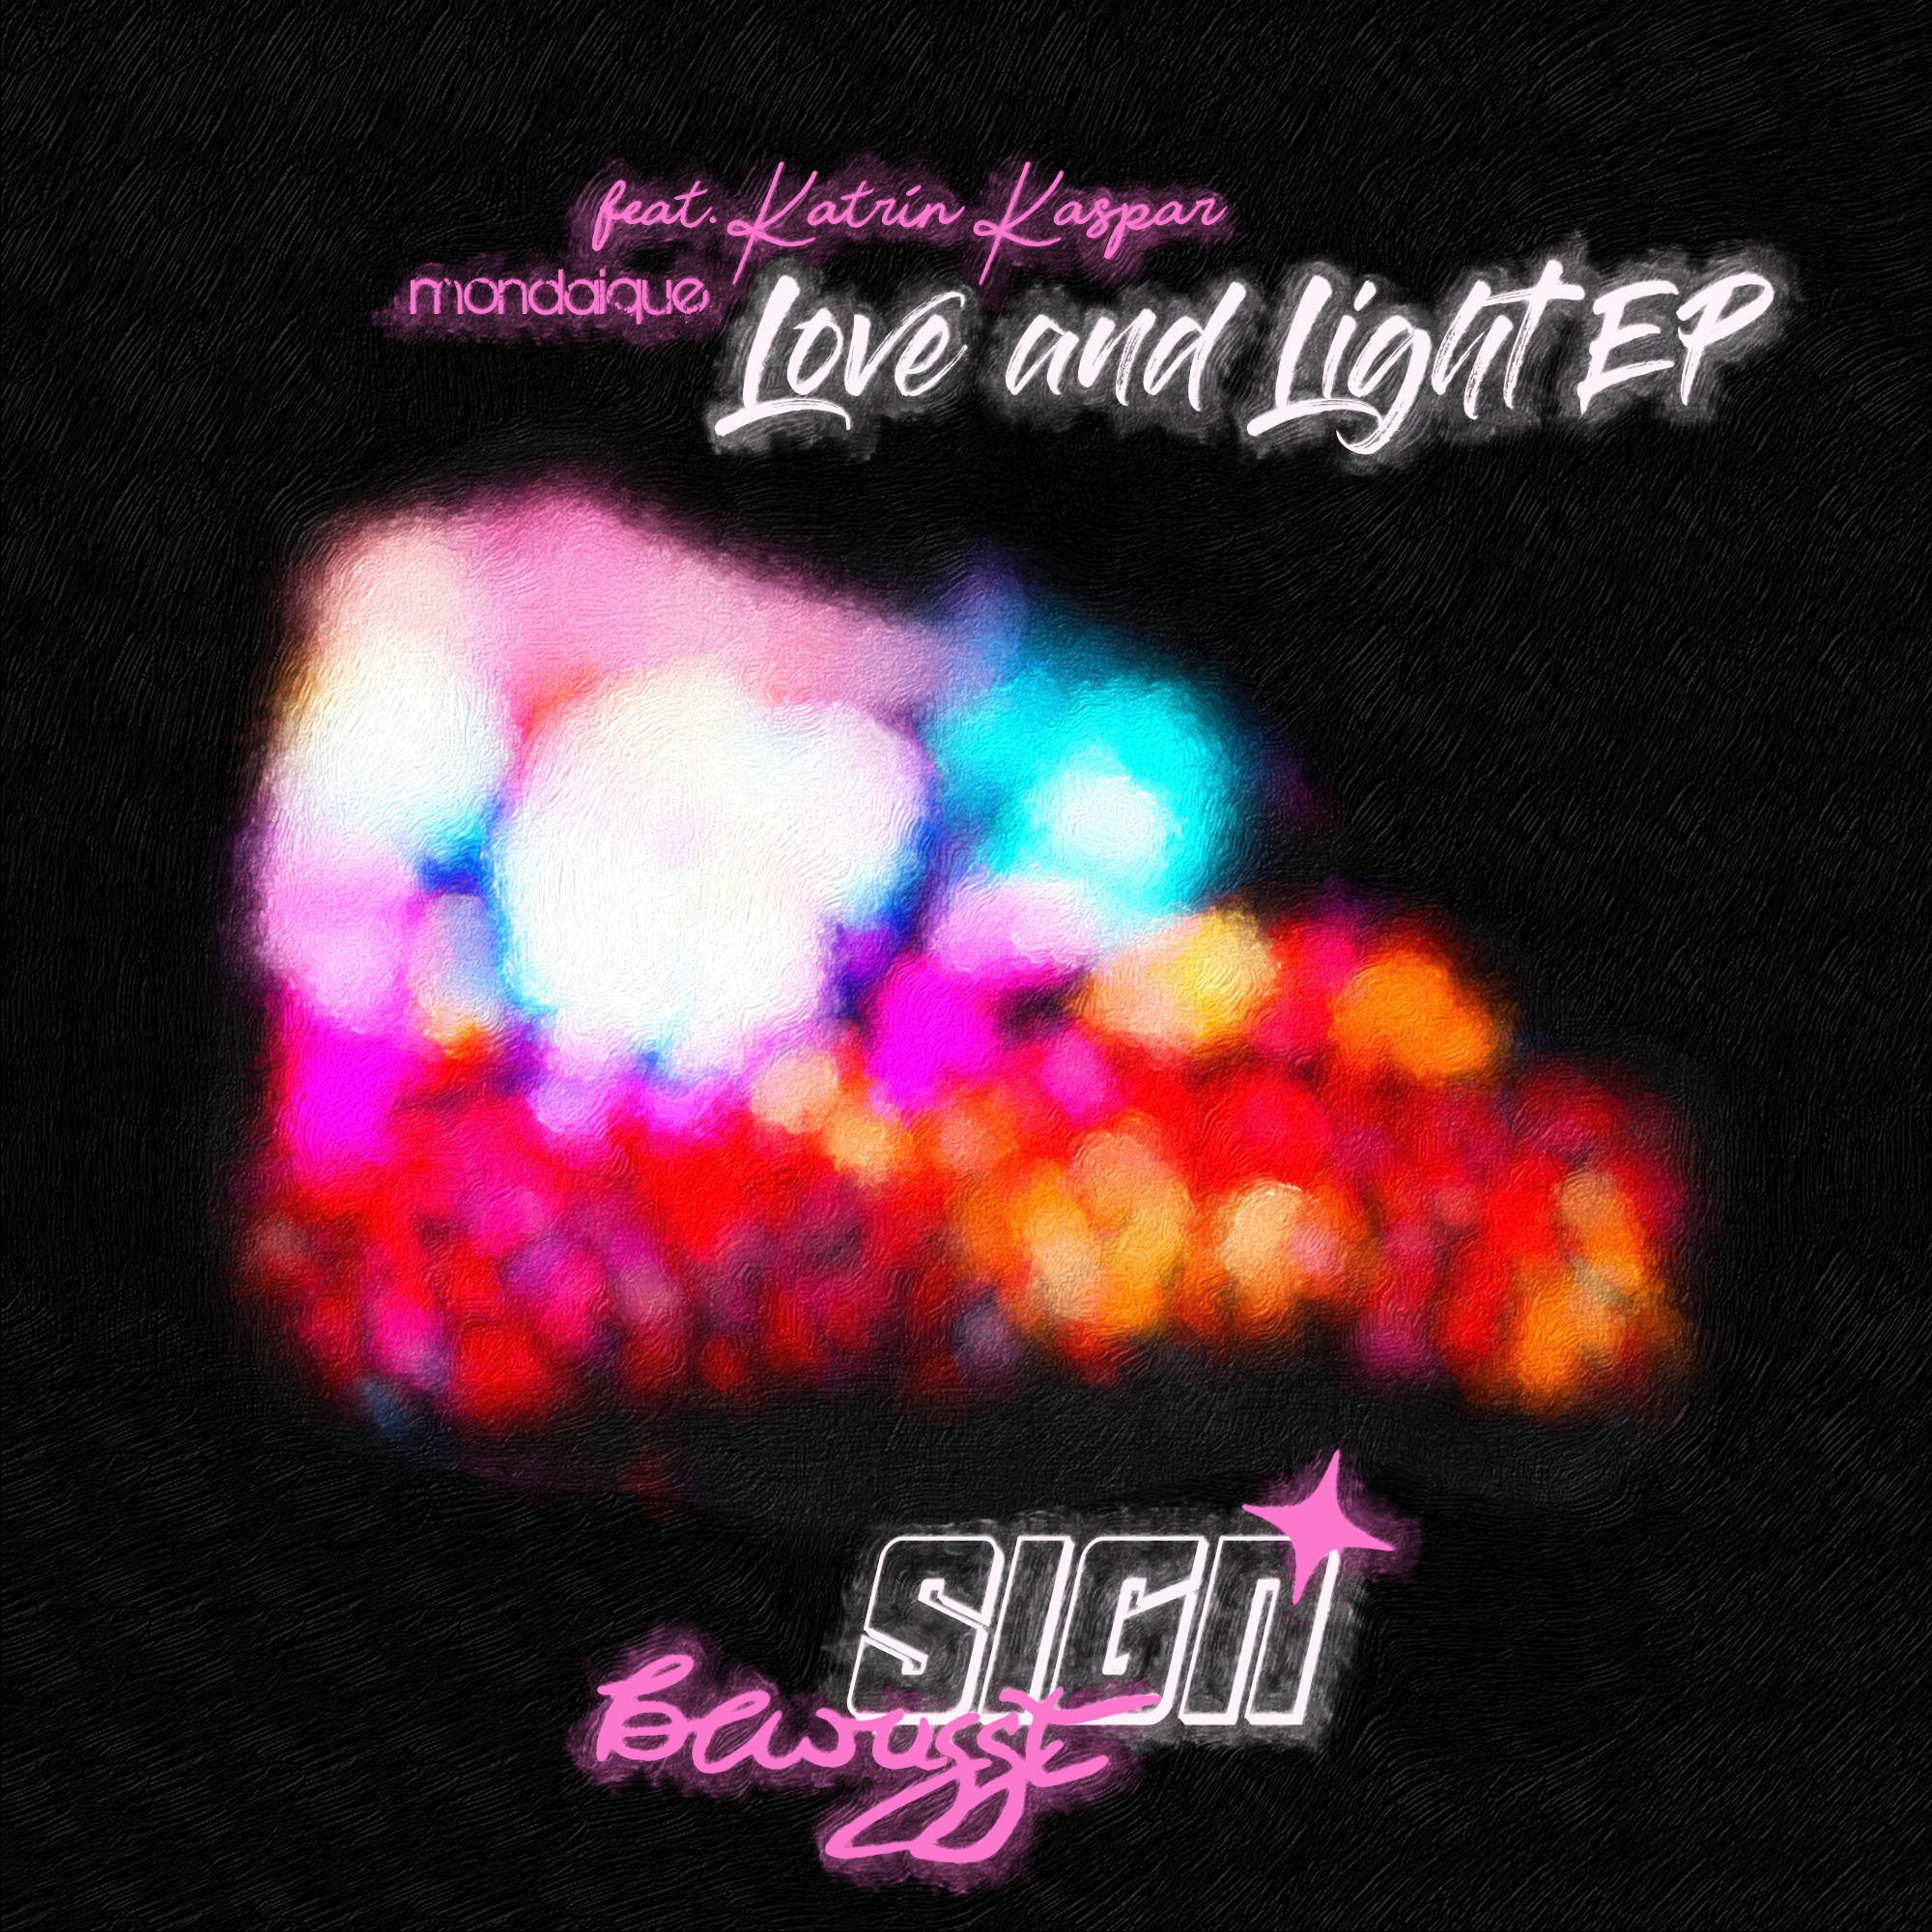 Love and Light EP